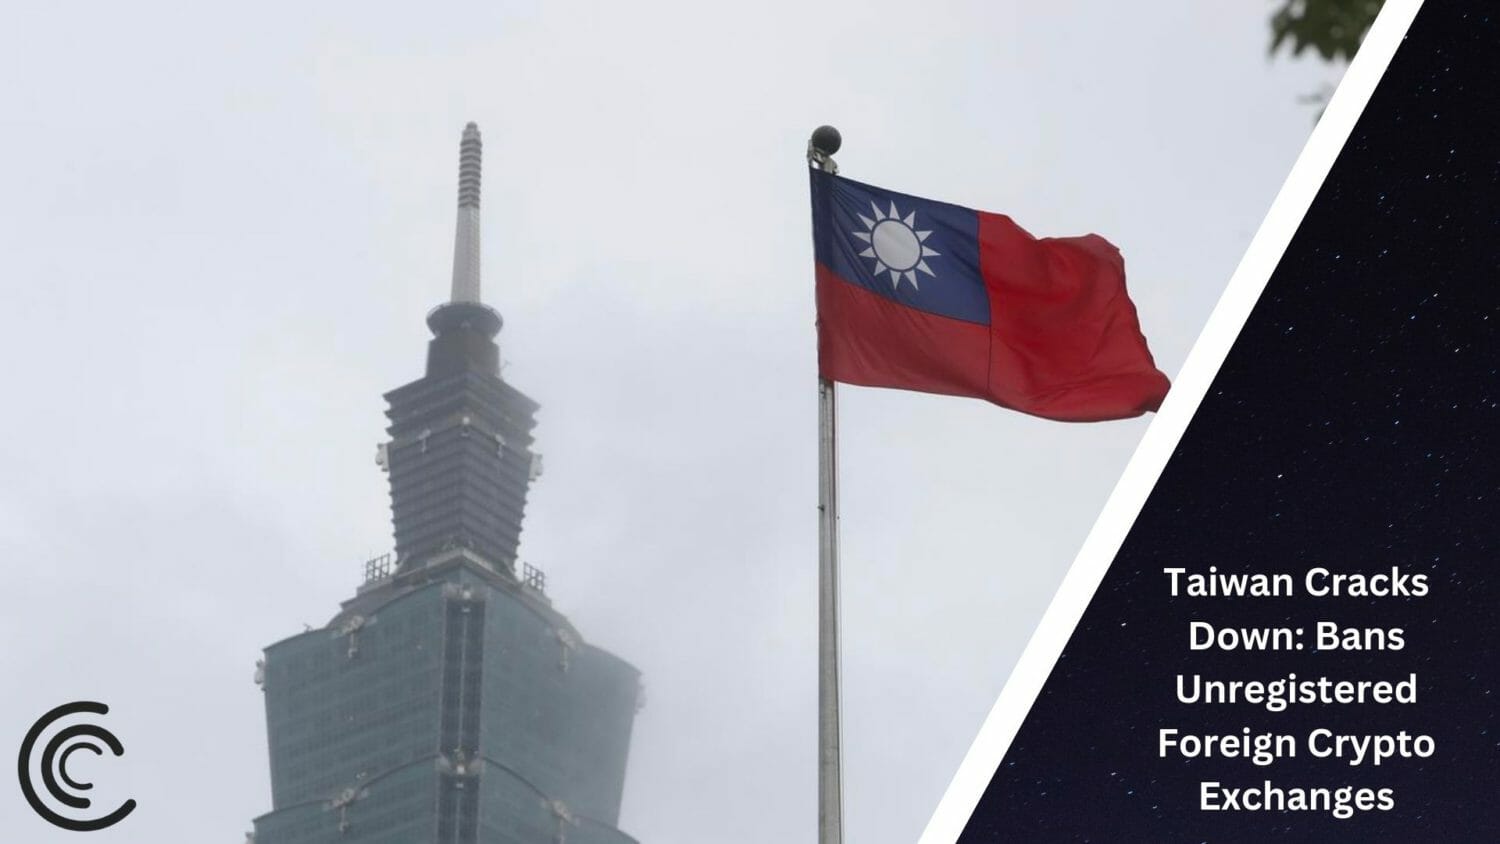 Taiwan Cracks Down: Bans Unregistered Foreign Crypto Exchanges